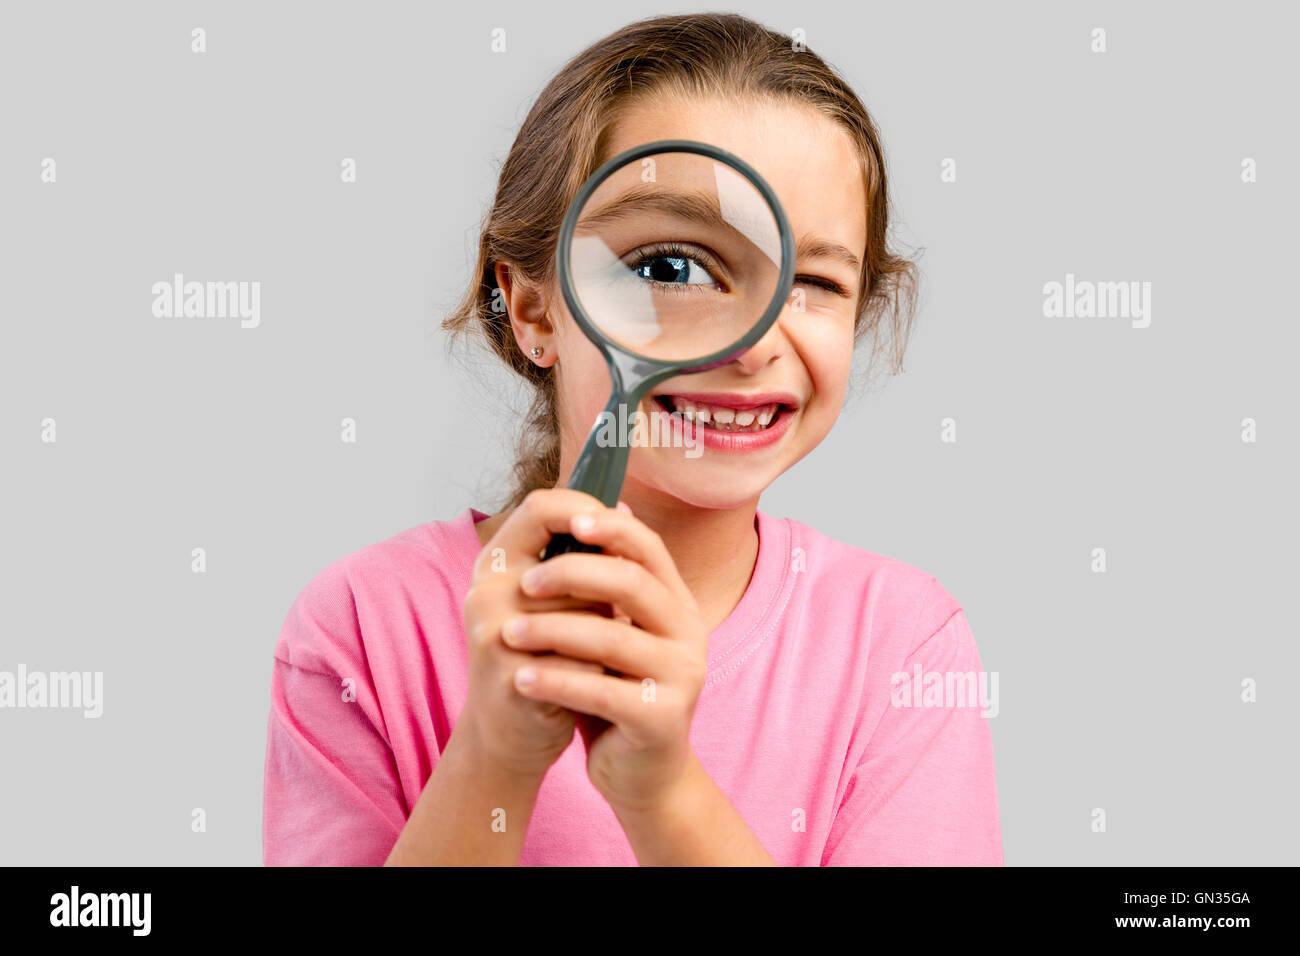 Cute little girl looking through a magnifying glass Stock Photo